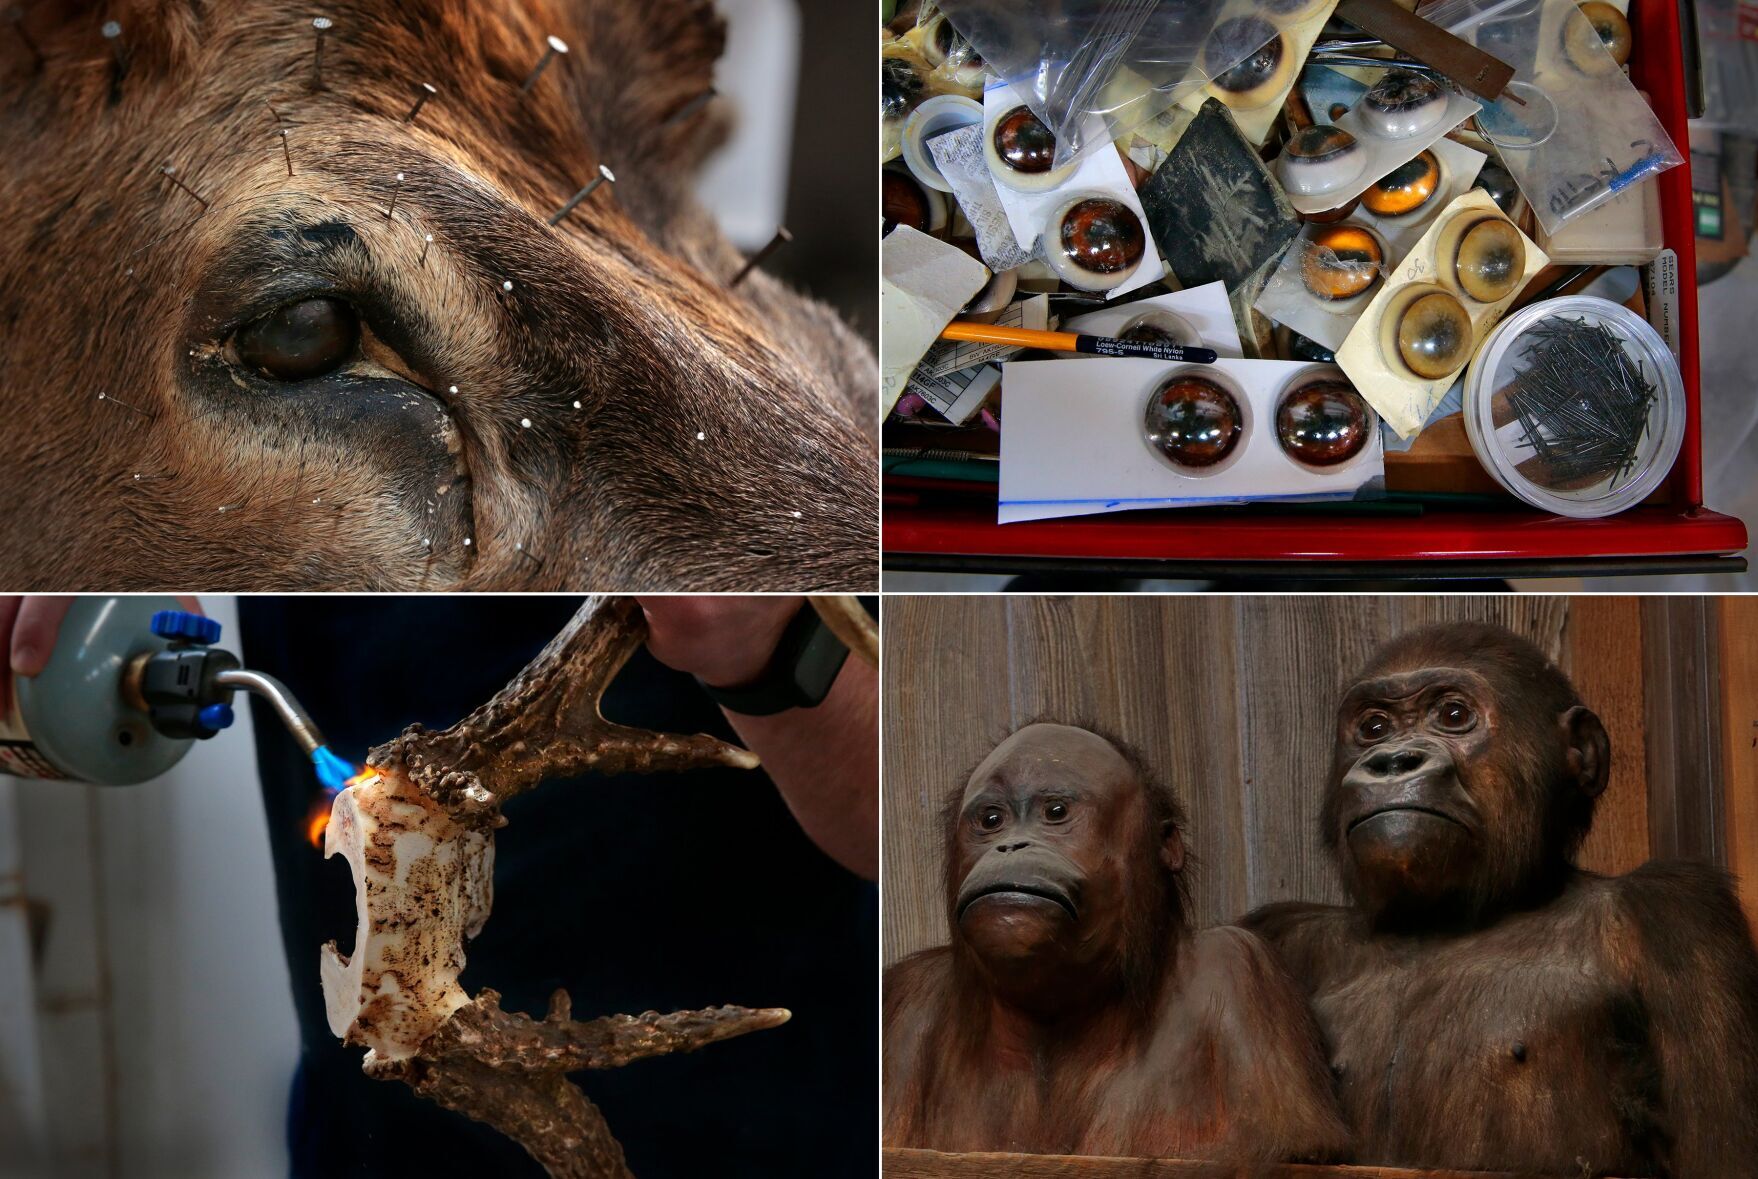 Oldest taxidermy studio in America running strong in Affton